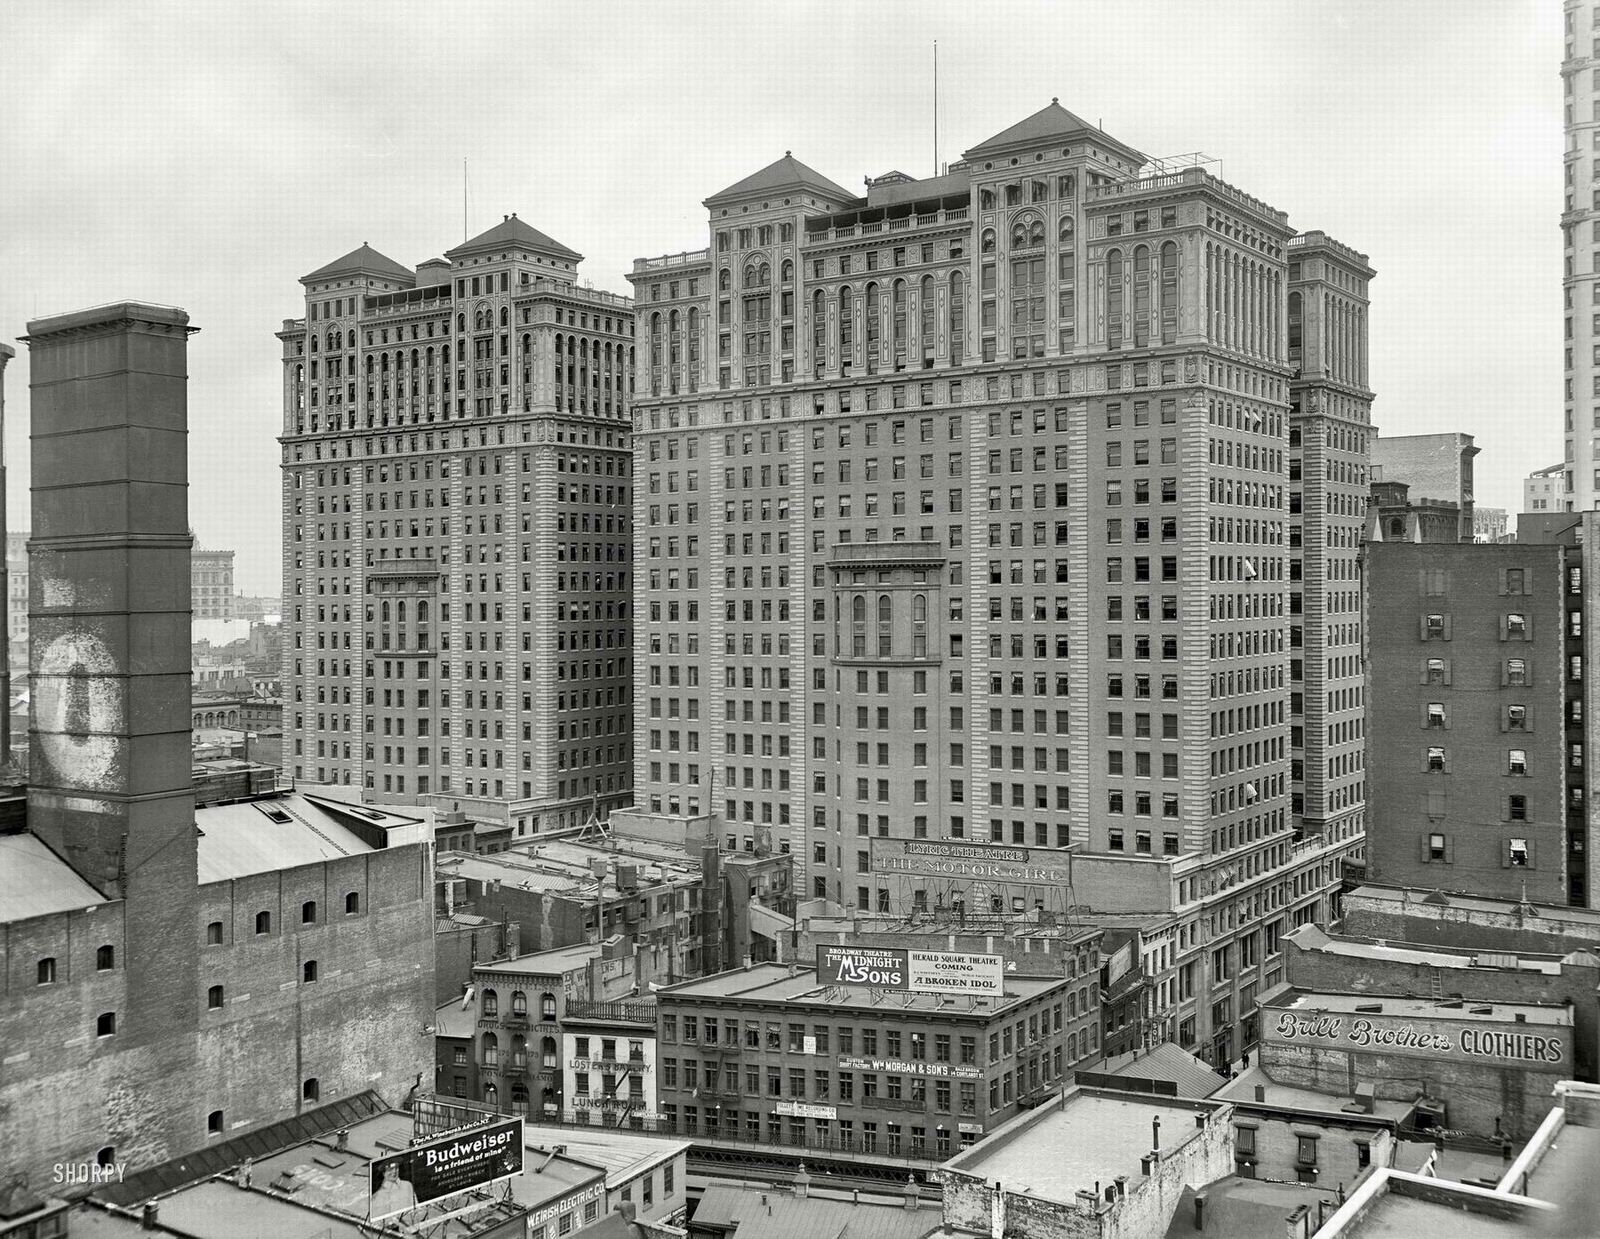 New York circa 1909. Hudson Terminal Buildings. At the site of the future World Trade Center.jpg